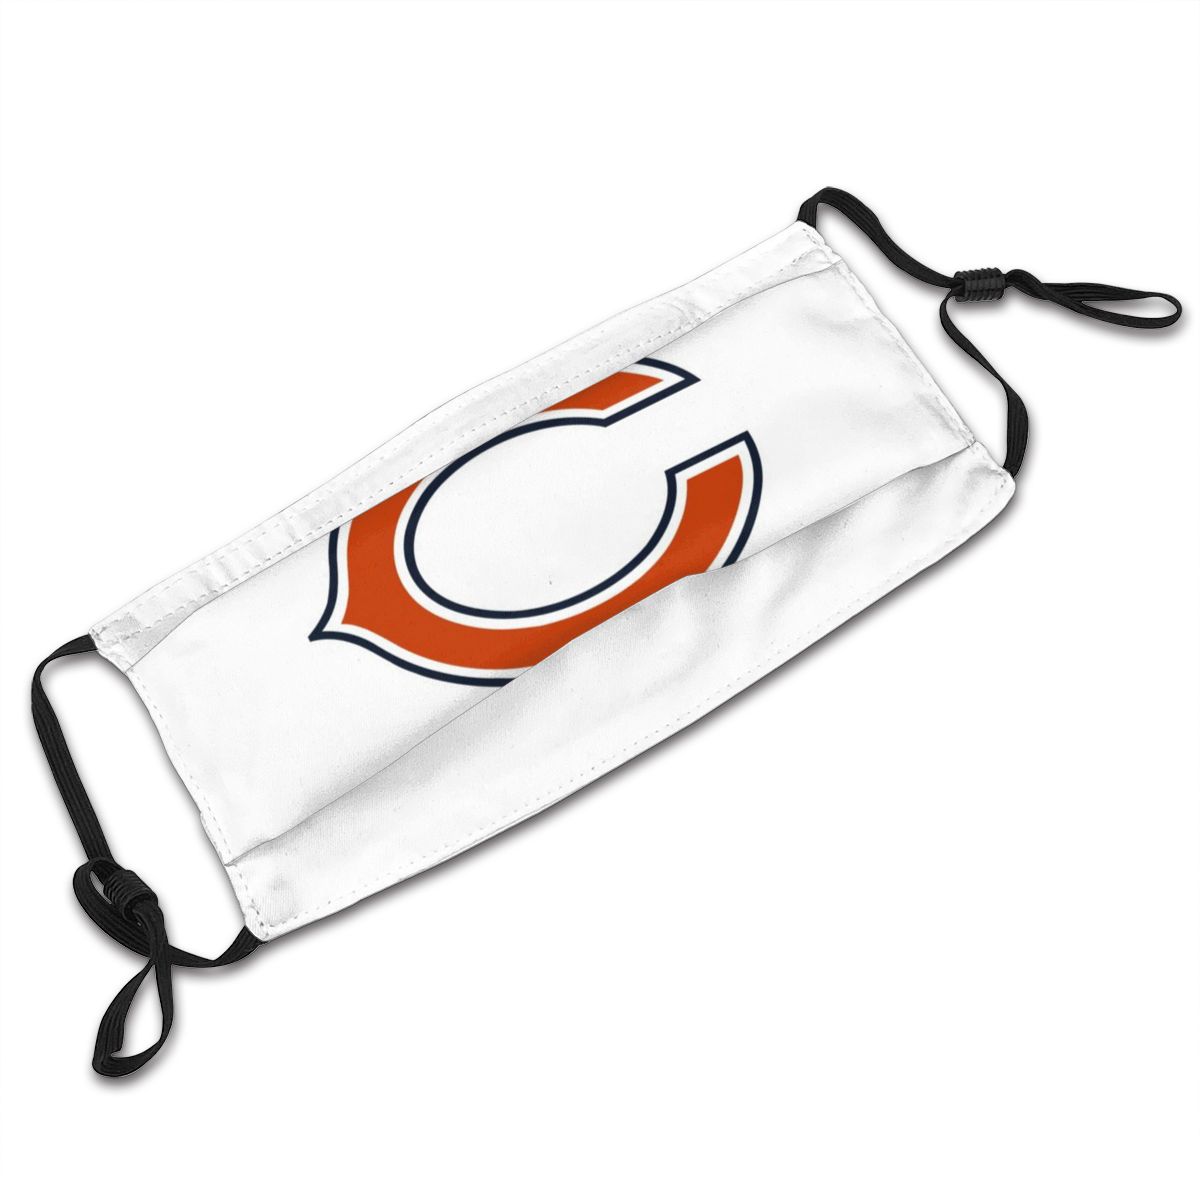 Print Football Personalized White Chicago Bears Adult Dust Mask With Filters PM 2.5